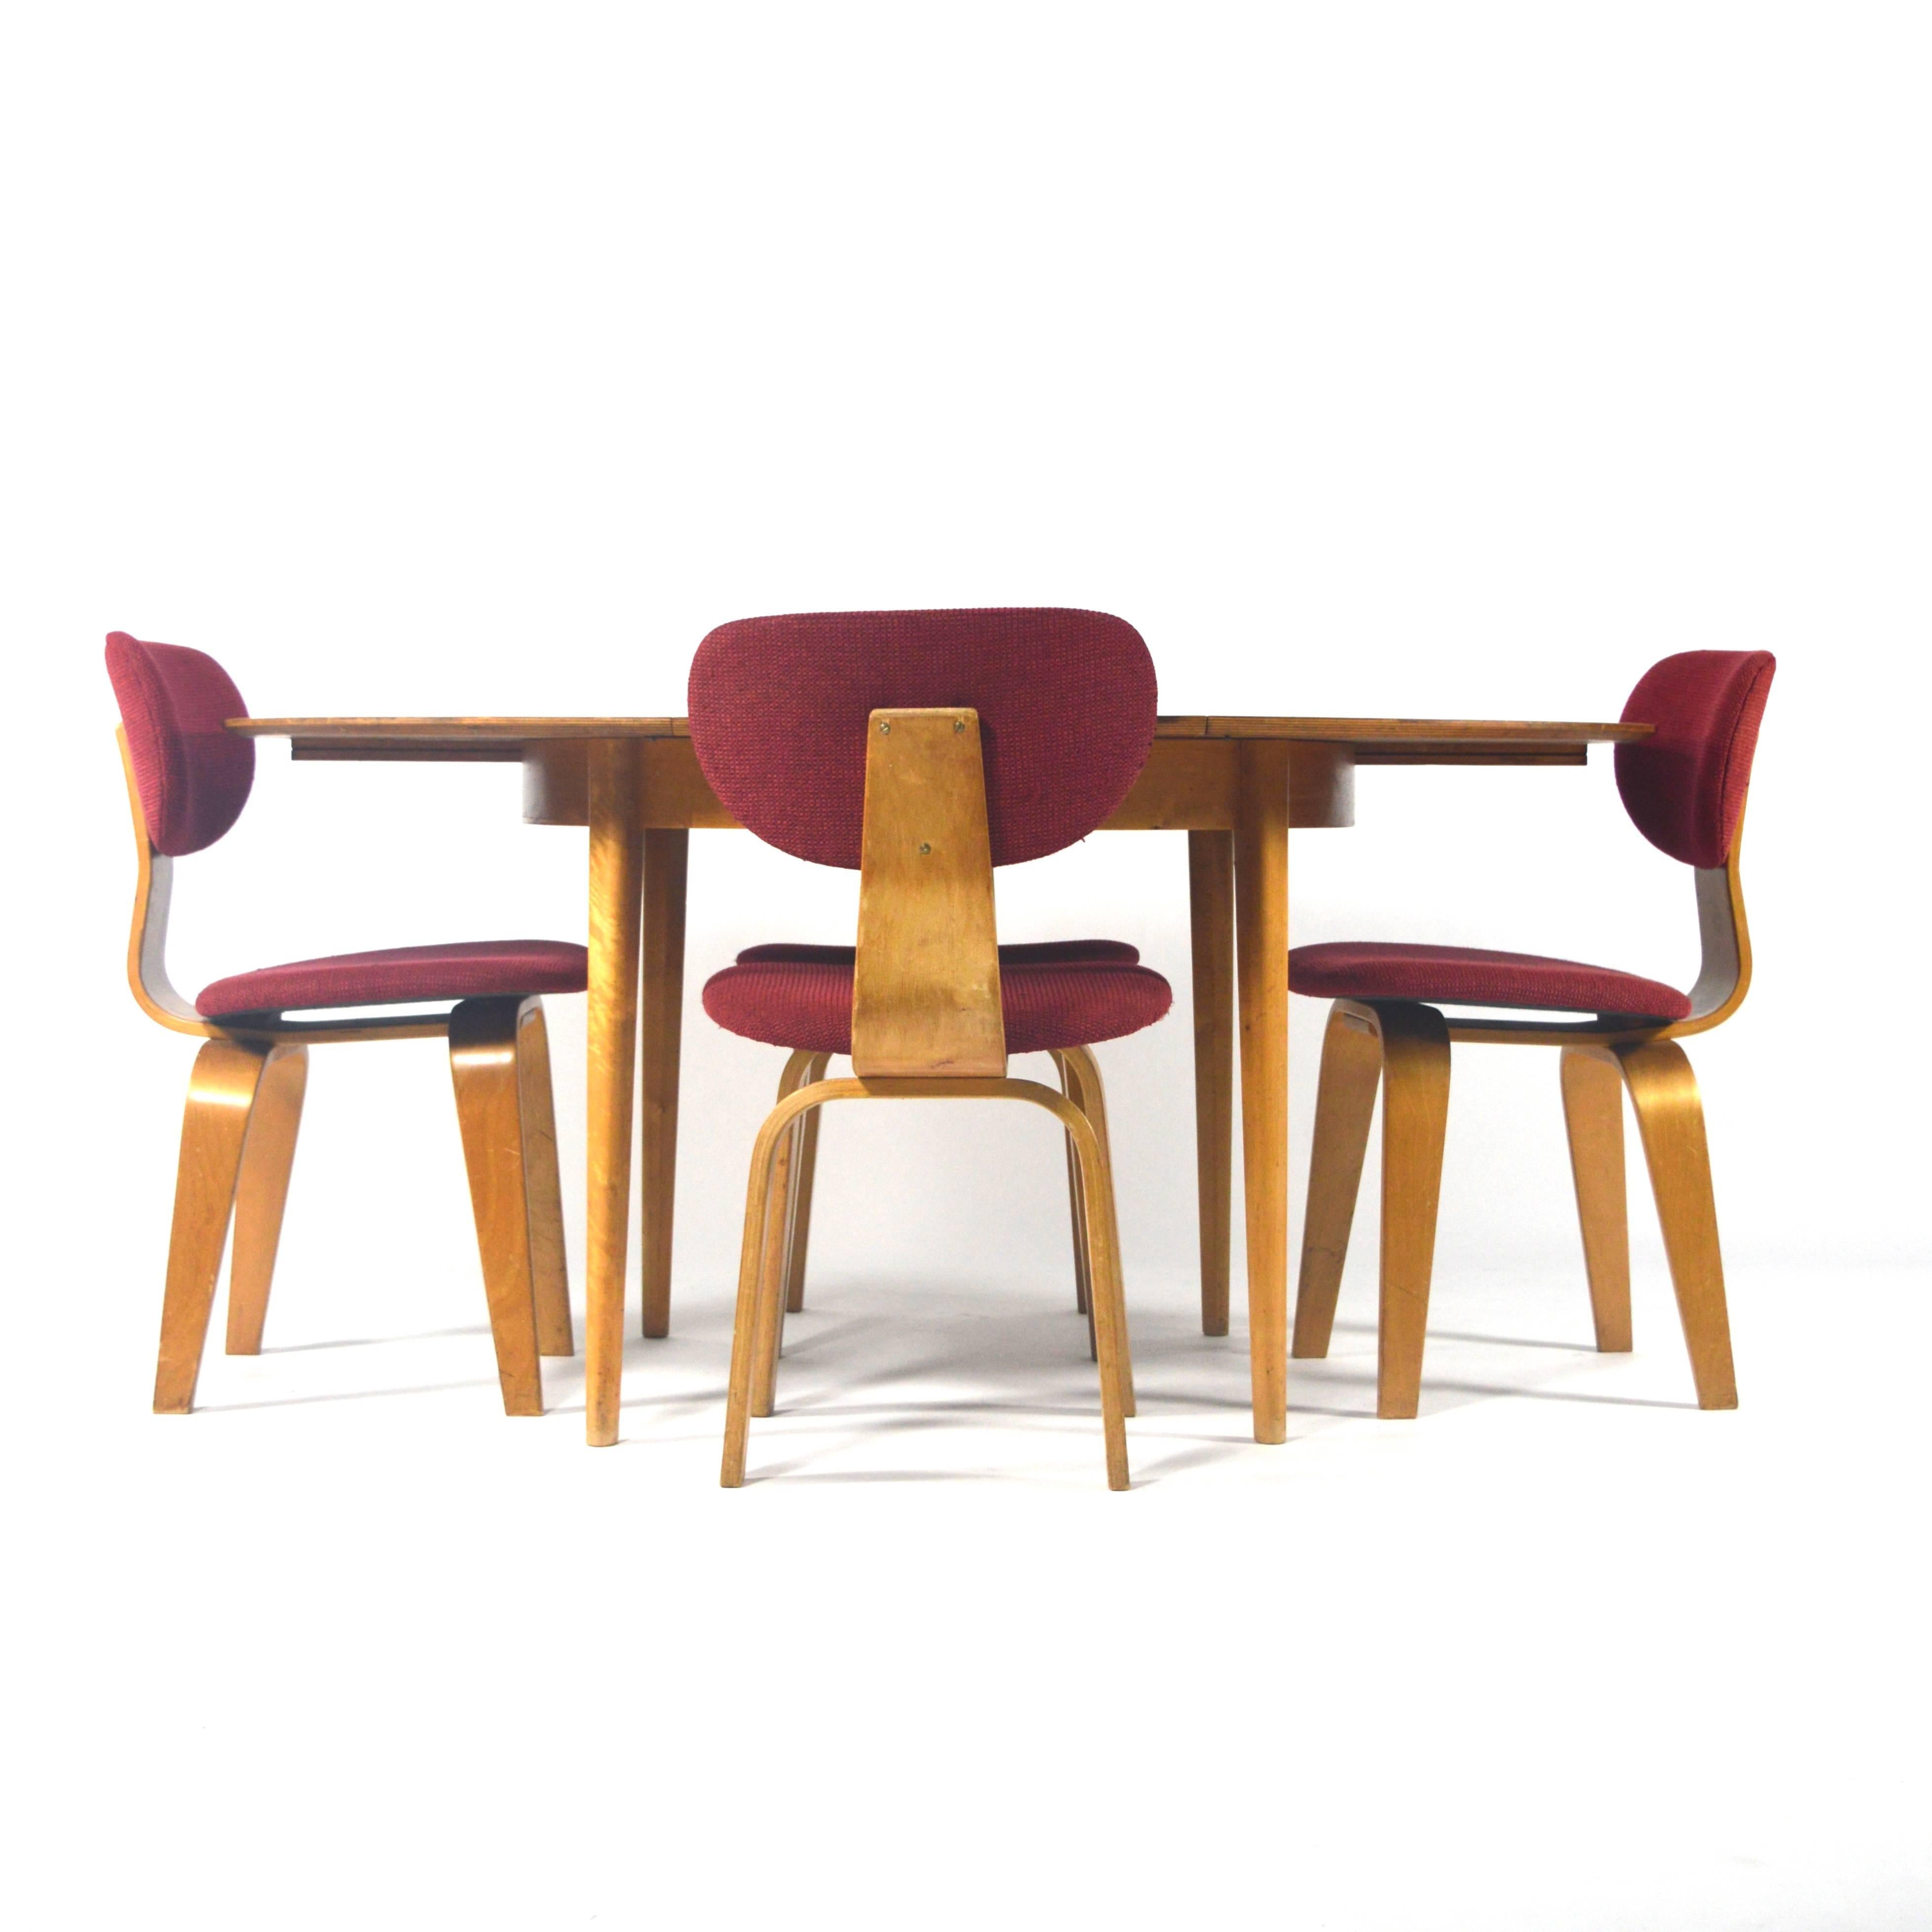 Beautiful Birch plywood dining set designed by the renowned Dutch designer Cees Braakman. The top of the table is made of beautiful contrasting Teak and is extendable from round to oval.
Table model: TB05 
Size table: ø41.43 Extended 61.02 Height